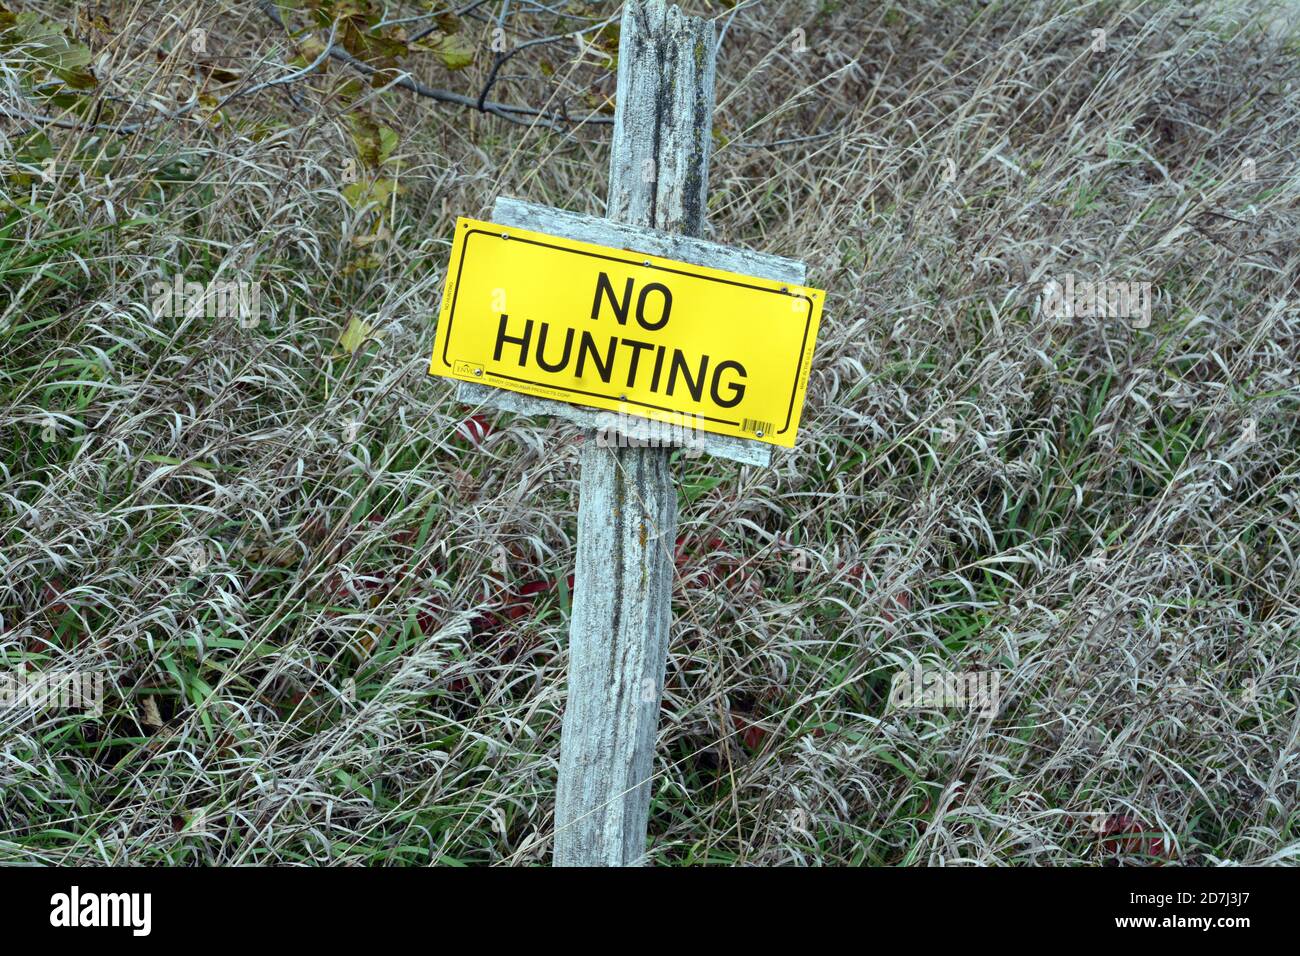 A 'No Hunting' sign on private property on the border between farmland and forest near the town of Orangeville in southern Ontario, Canada. Stock Photo